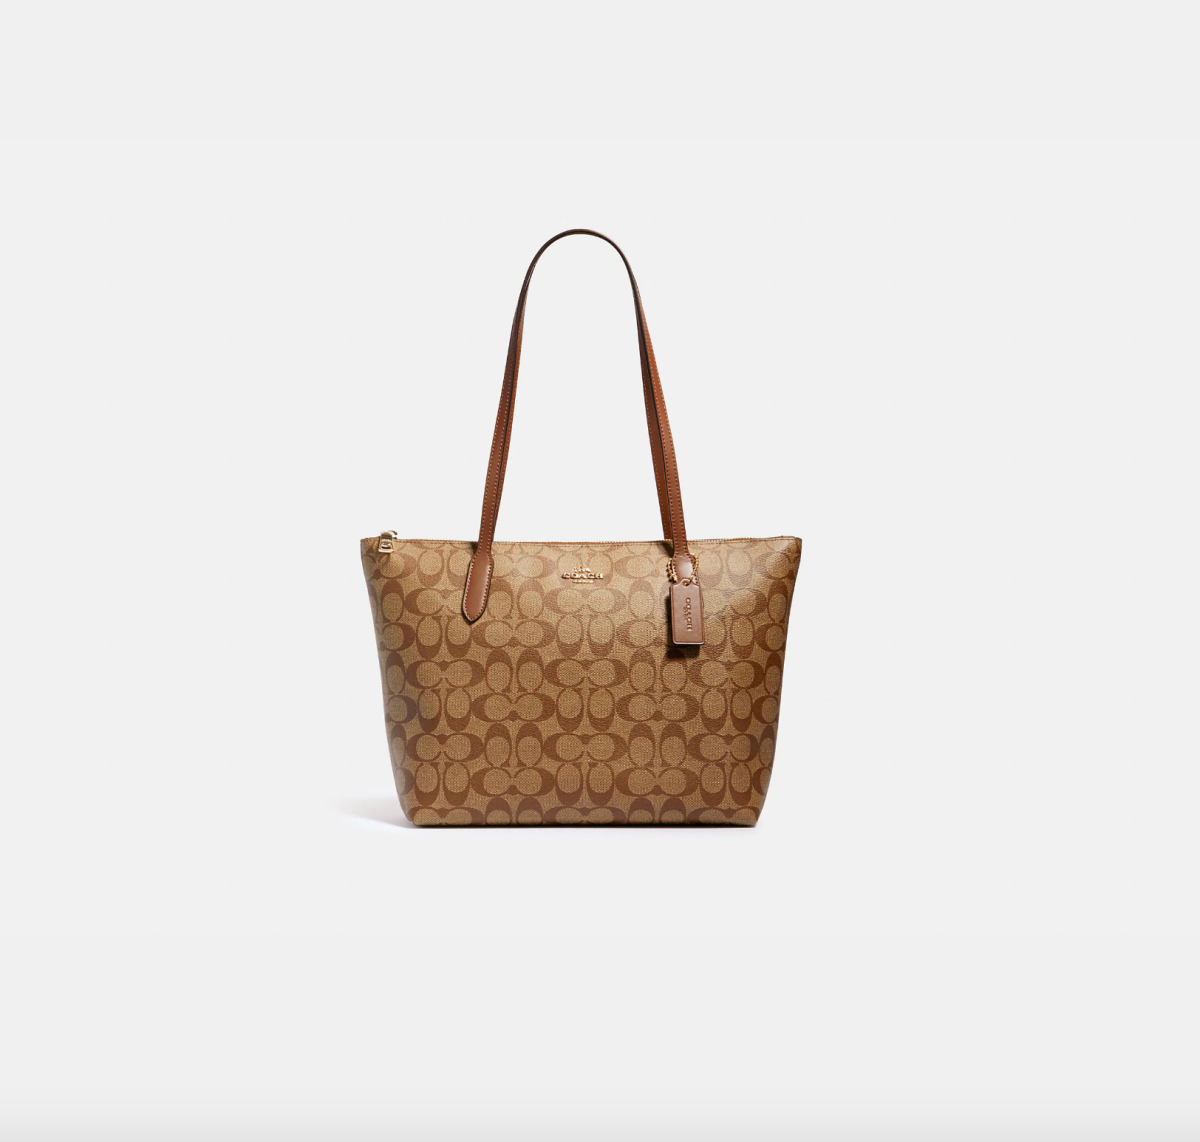 Save $300 on This Stylish Coach Tote Bag With 1,400+ 5-Star Reviews